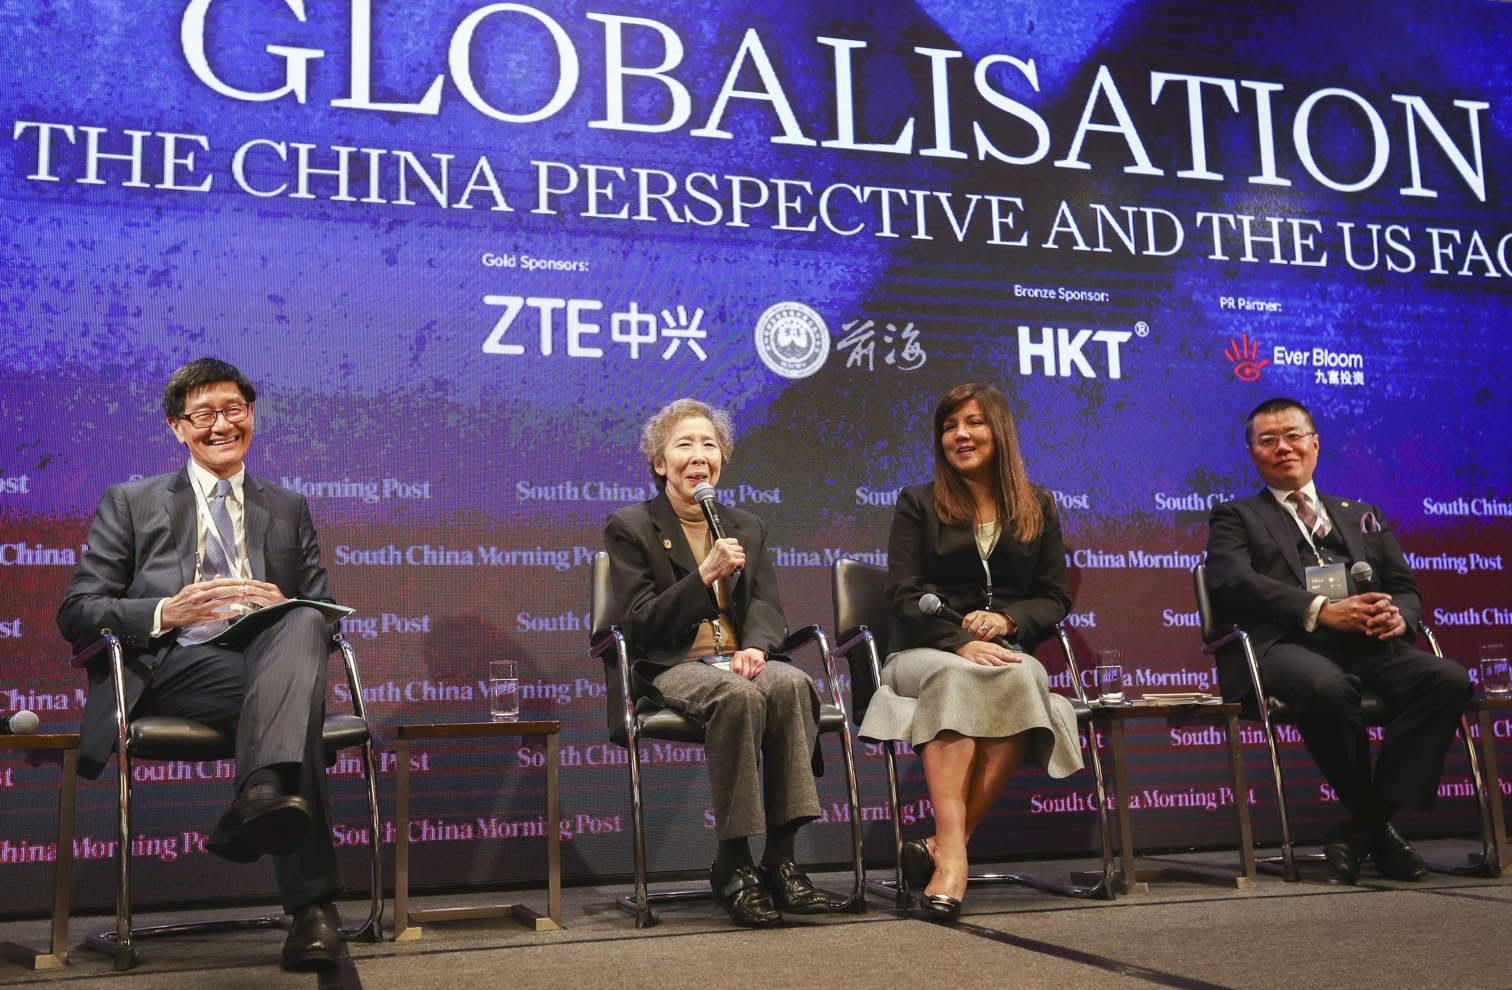 From L-R: Lincoln Leong, Chief Executive Officer of MTR Corporation; Dr. Annie Wu, Member, Standing Committee, Chinese People's Political Consultative Conference; and Professor Witman Hung, Principal Liaison Officer for Hong Kong, Shenzhen Qianhai Authority were panellists at the SCMP’s annual China Conference on January 11, 2018. The panel discussing the Belt and Road Initiative was moderated by Zuraidah Ibrahim, SCMP Deputy Executive Editor (third from left). Photo: Nora Tam